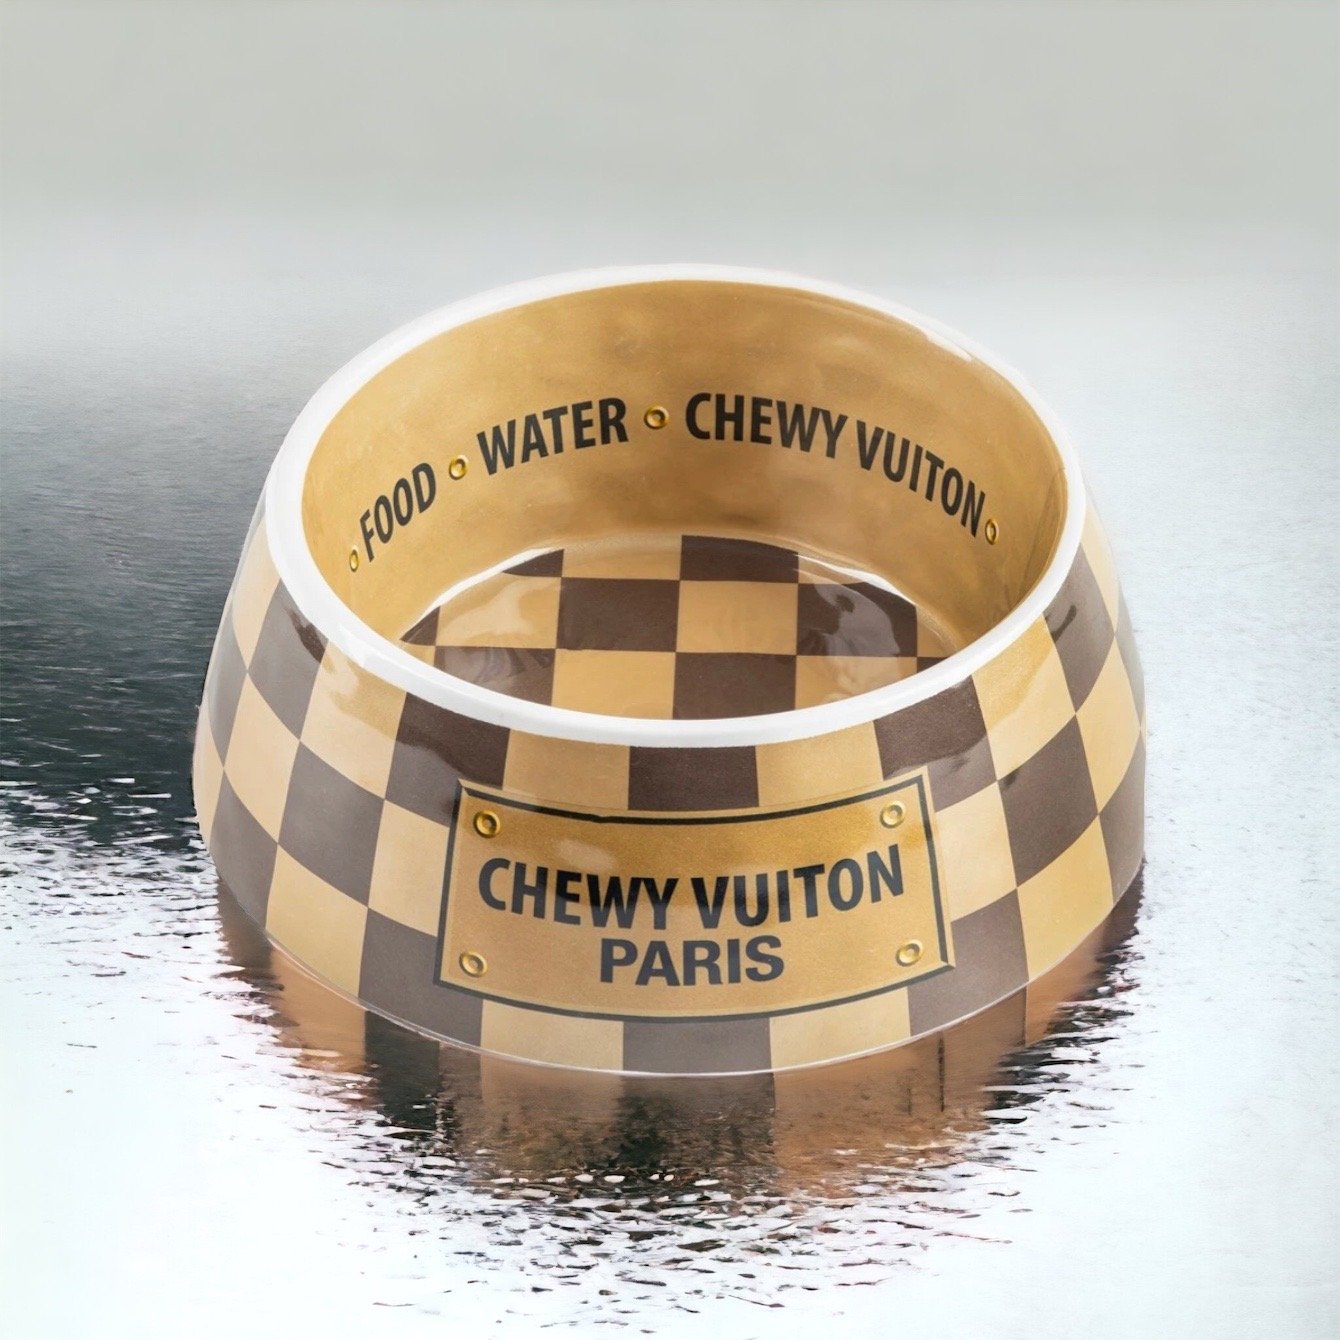 Colorful Chewy Vuitton Dog Bowl